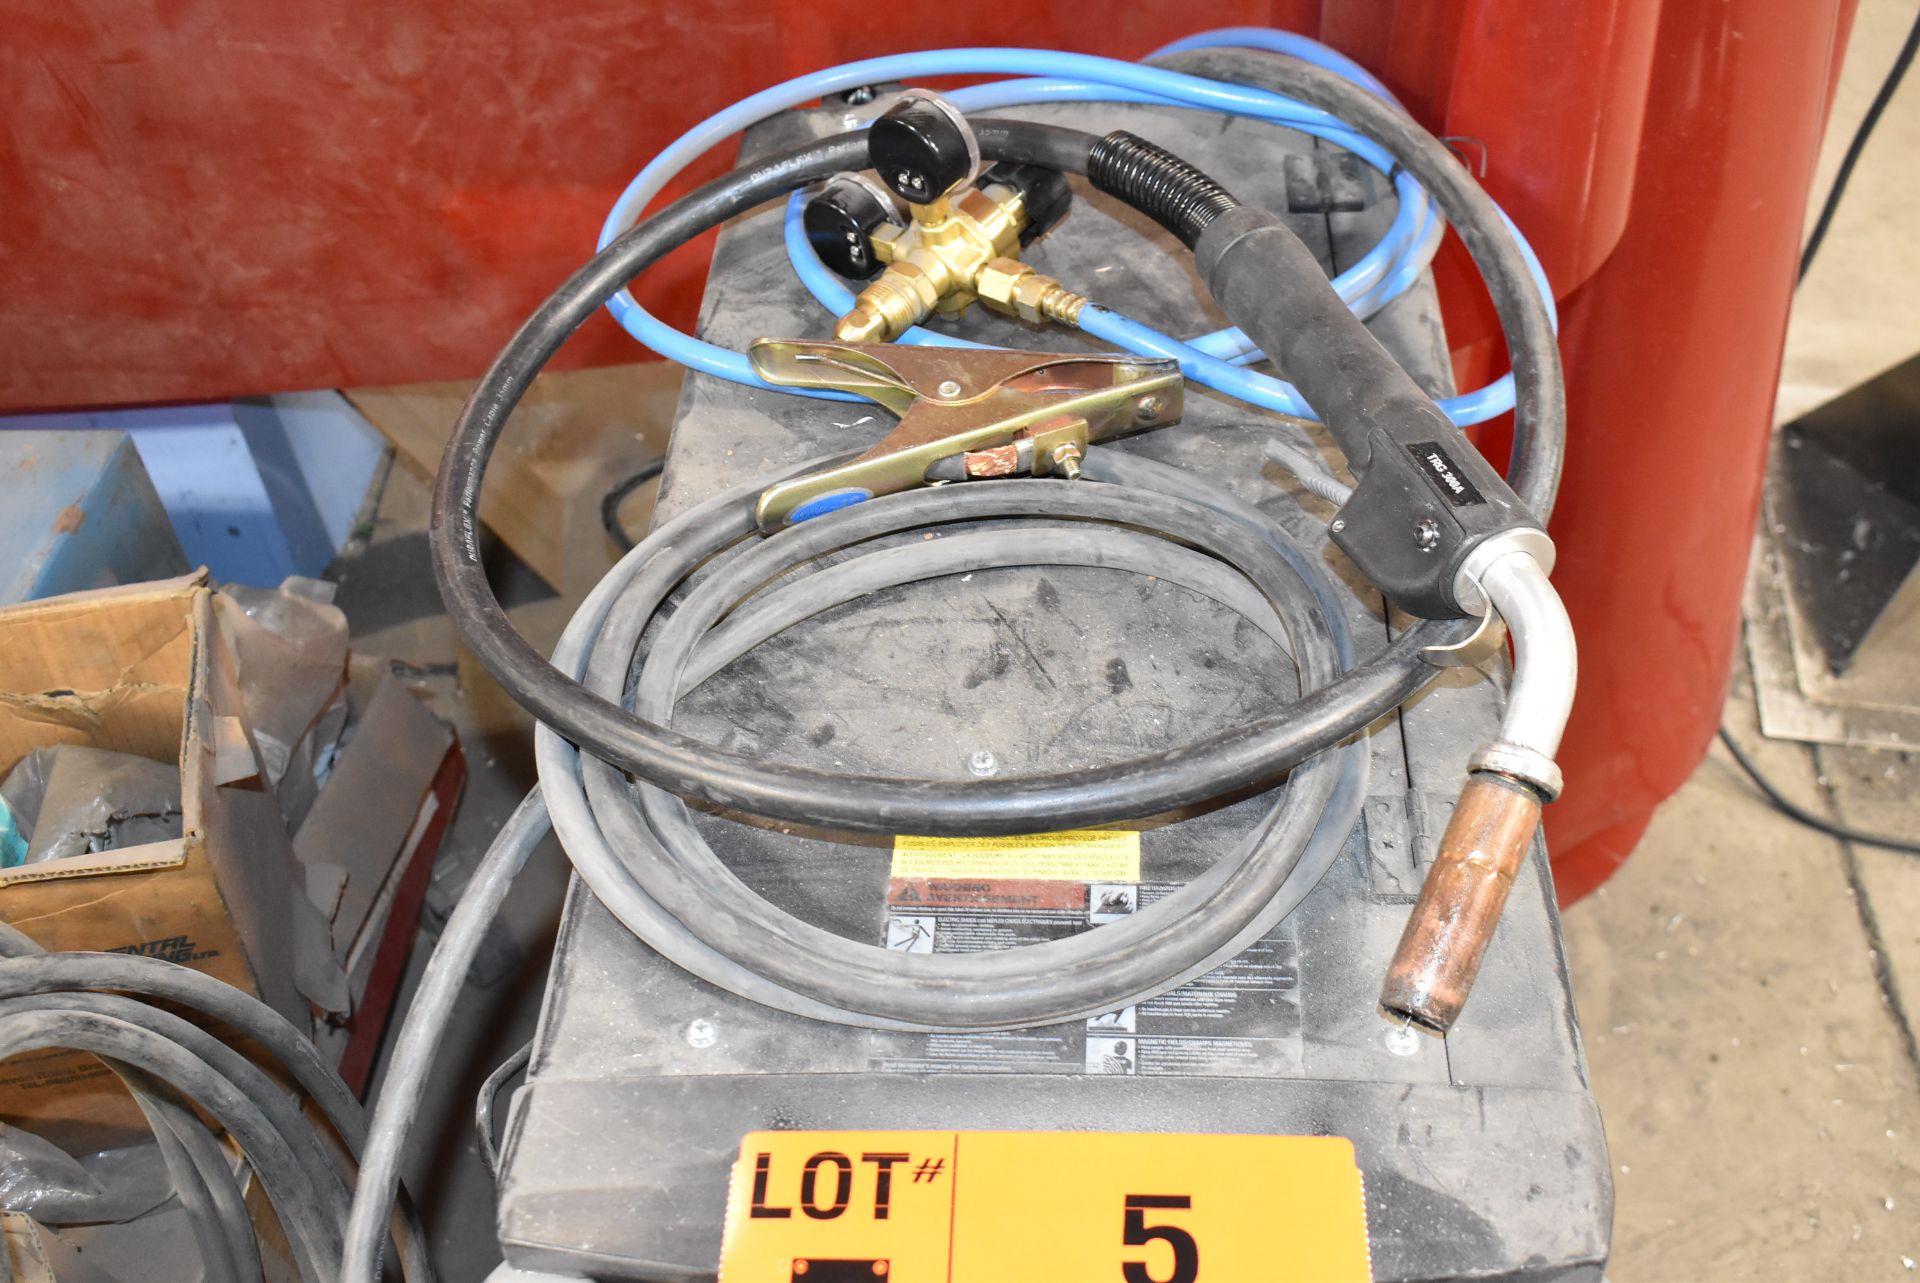 CROSSFIRE HGMIG 251A MIG WELDER WITH CABLES AND GUN, S/N 20081320292 [RIGGING FOR FOR LOT #5 - $25 - Image 3 of 5